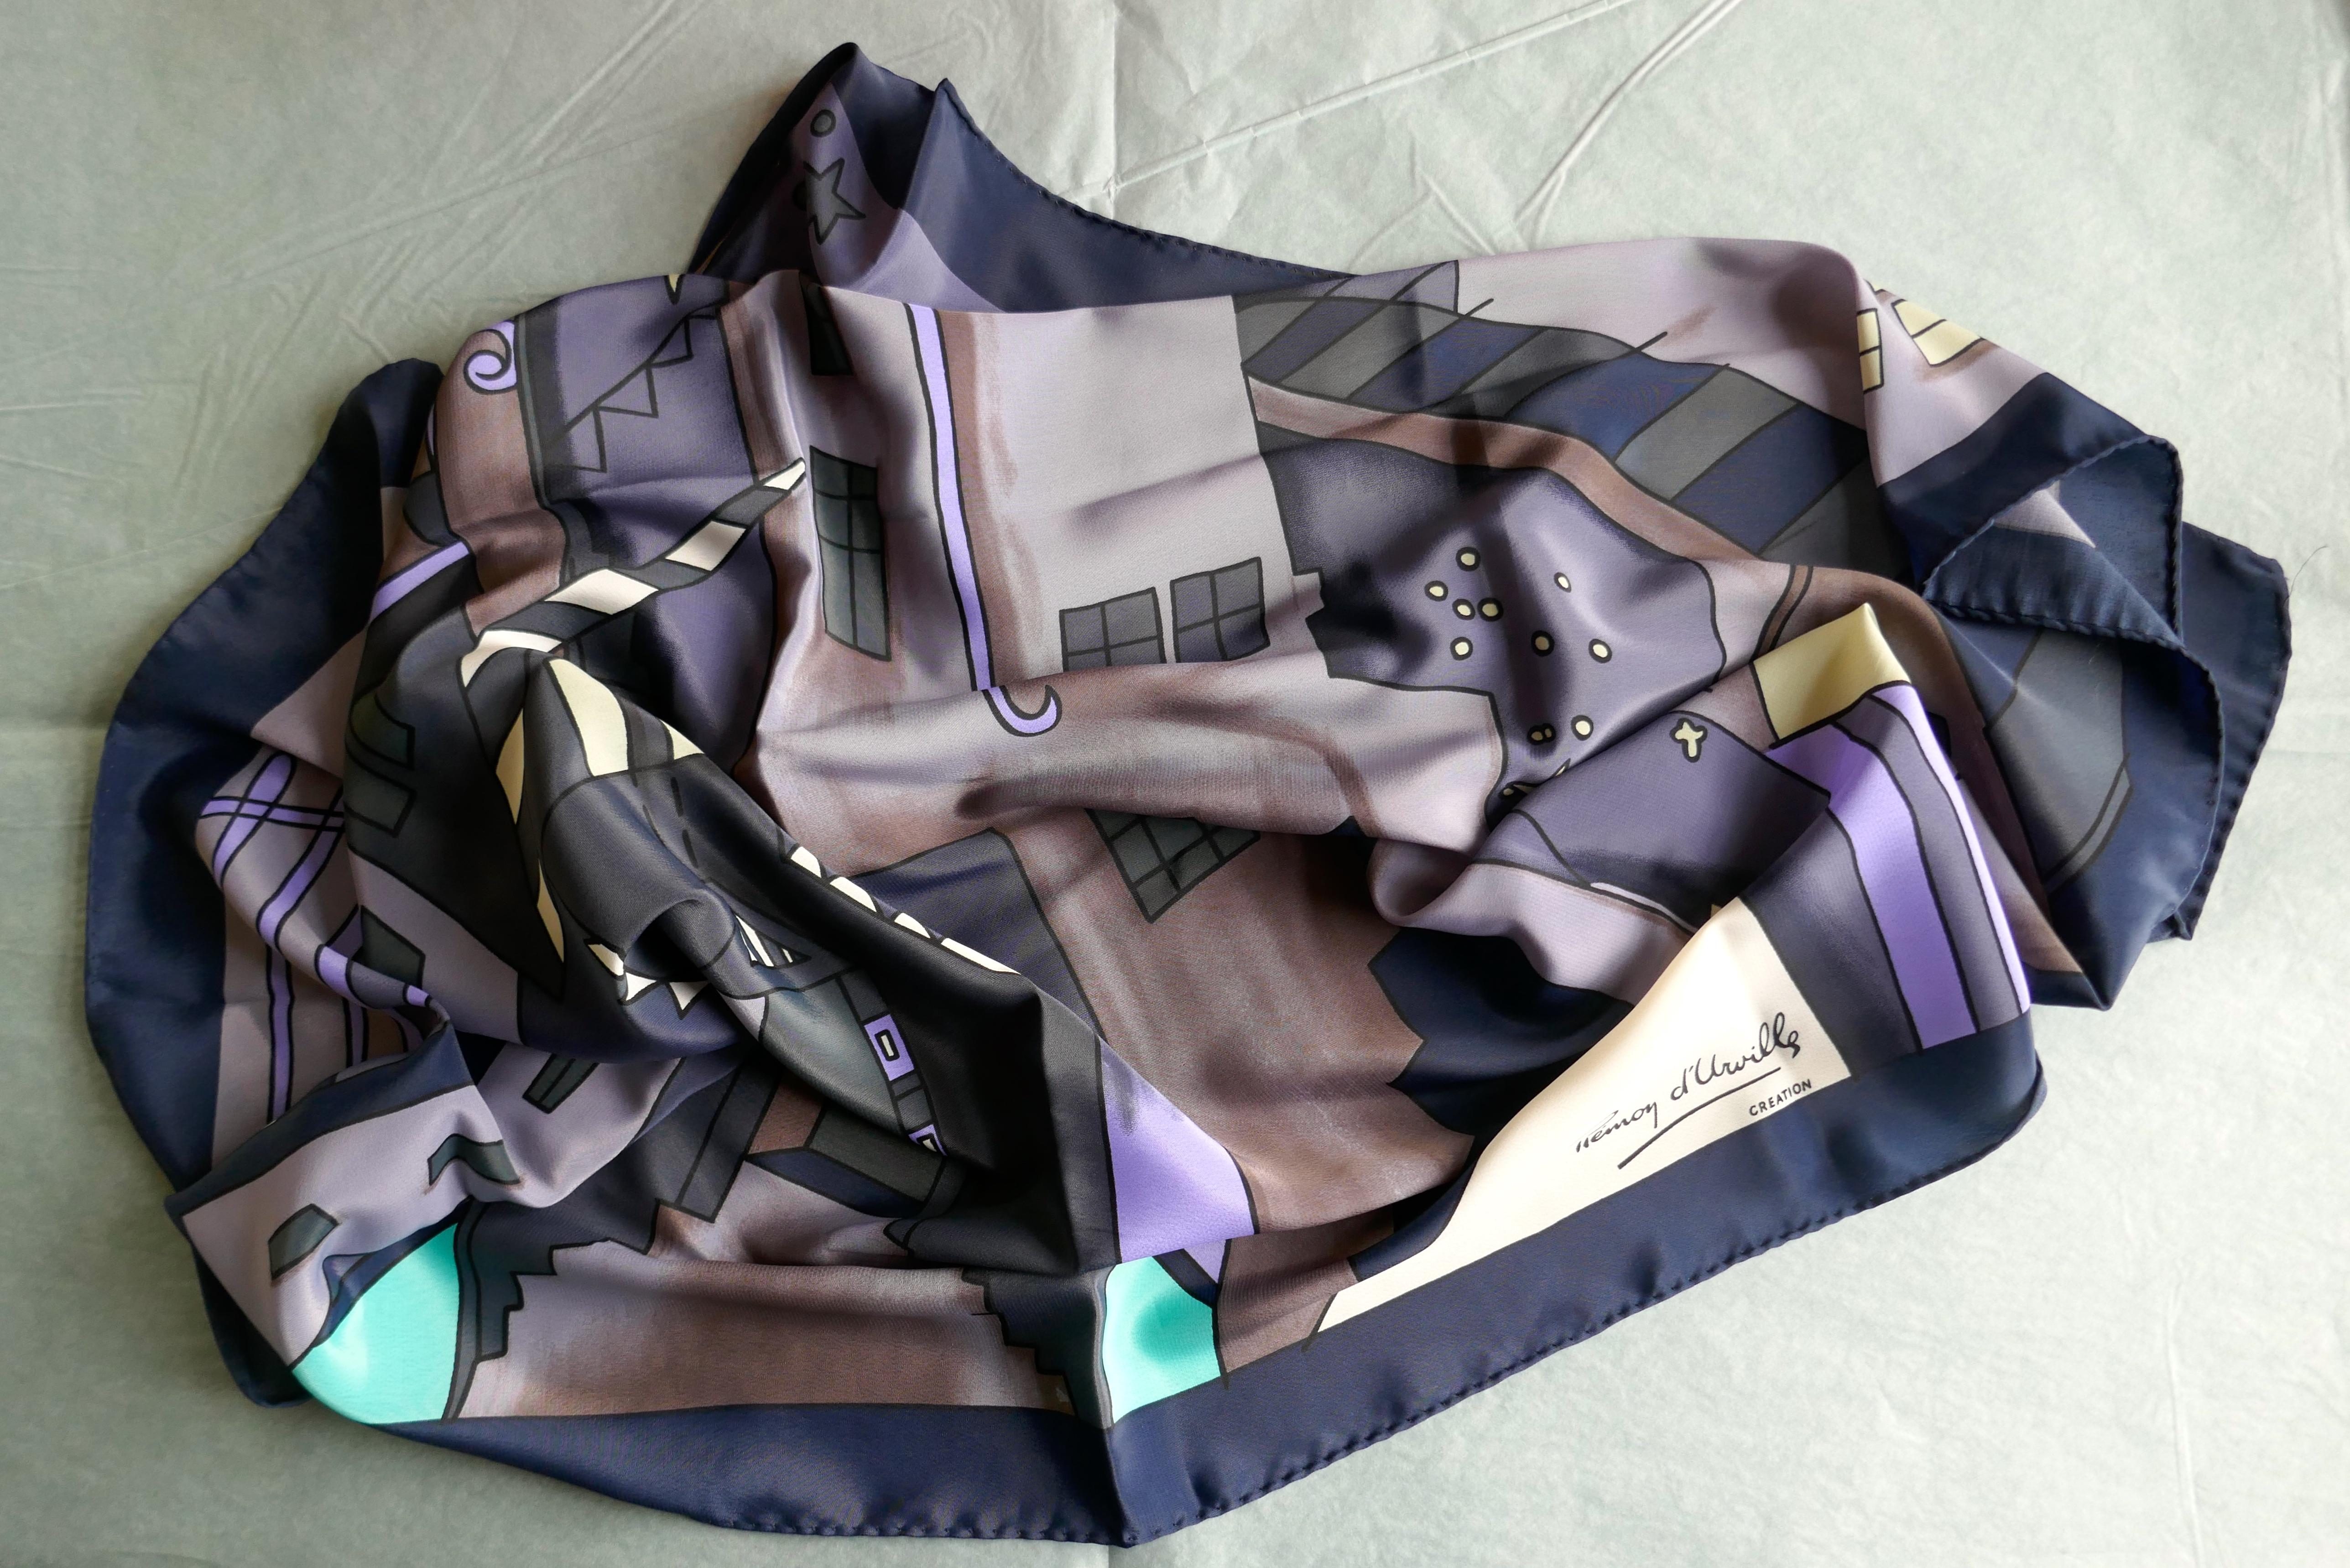 Rare Remoy d'Urville Creation Designer Silk Scarf  Vintage1980s Abstract Cityscape 

Moda Italiana Twilight Pallet signed 
Unworn and safely stored away in acid free paper 
It is as crisp as the day of purchase. As shown in the photos, this stunning